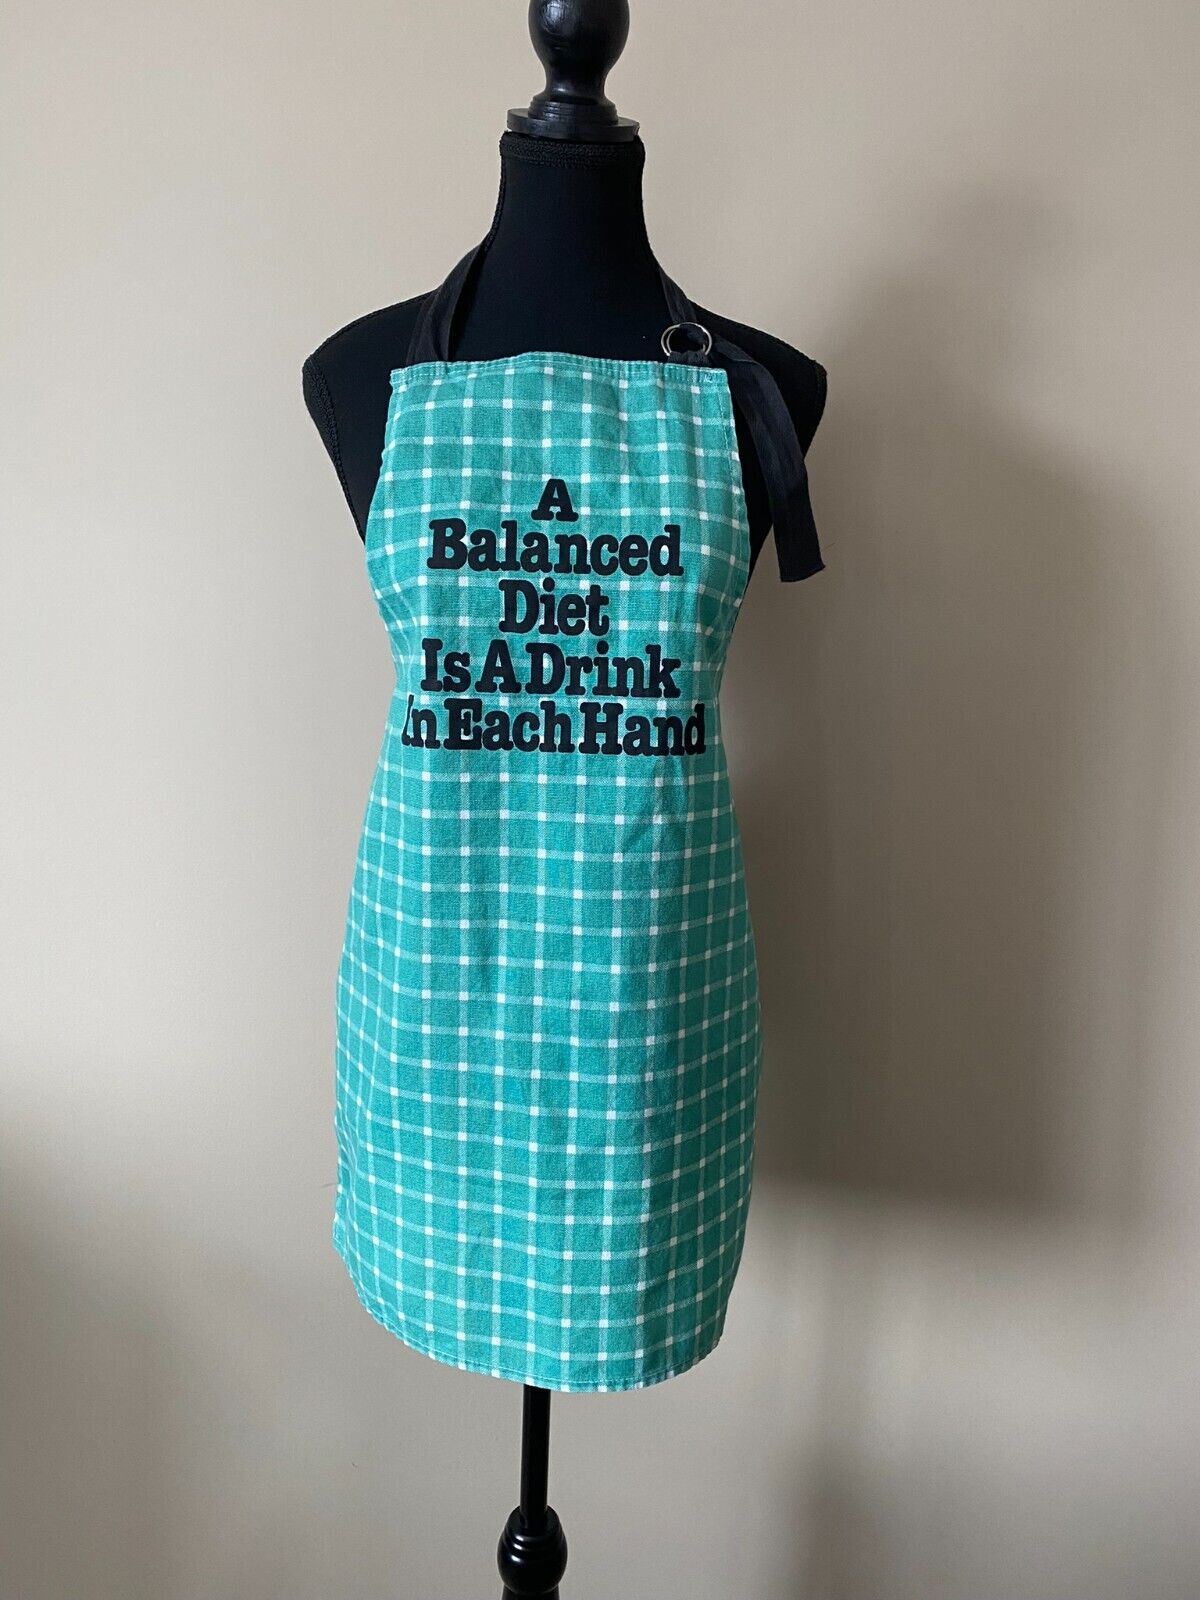 VTG Now Designs Apron San Francisco Balanced Diet is A Drink In Each Hand USA